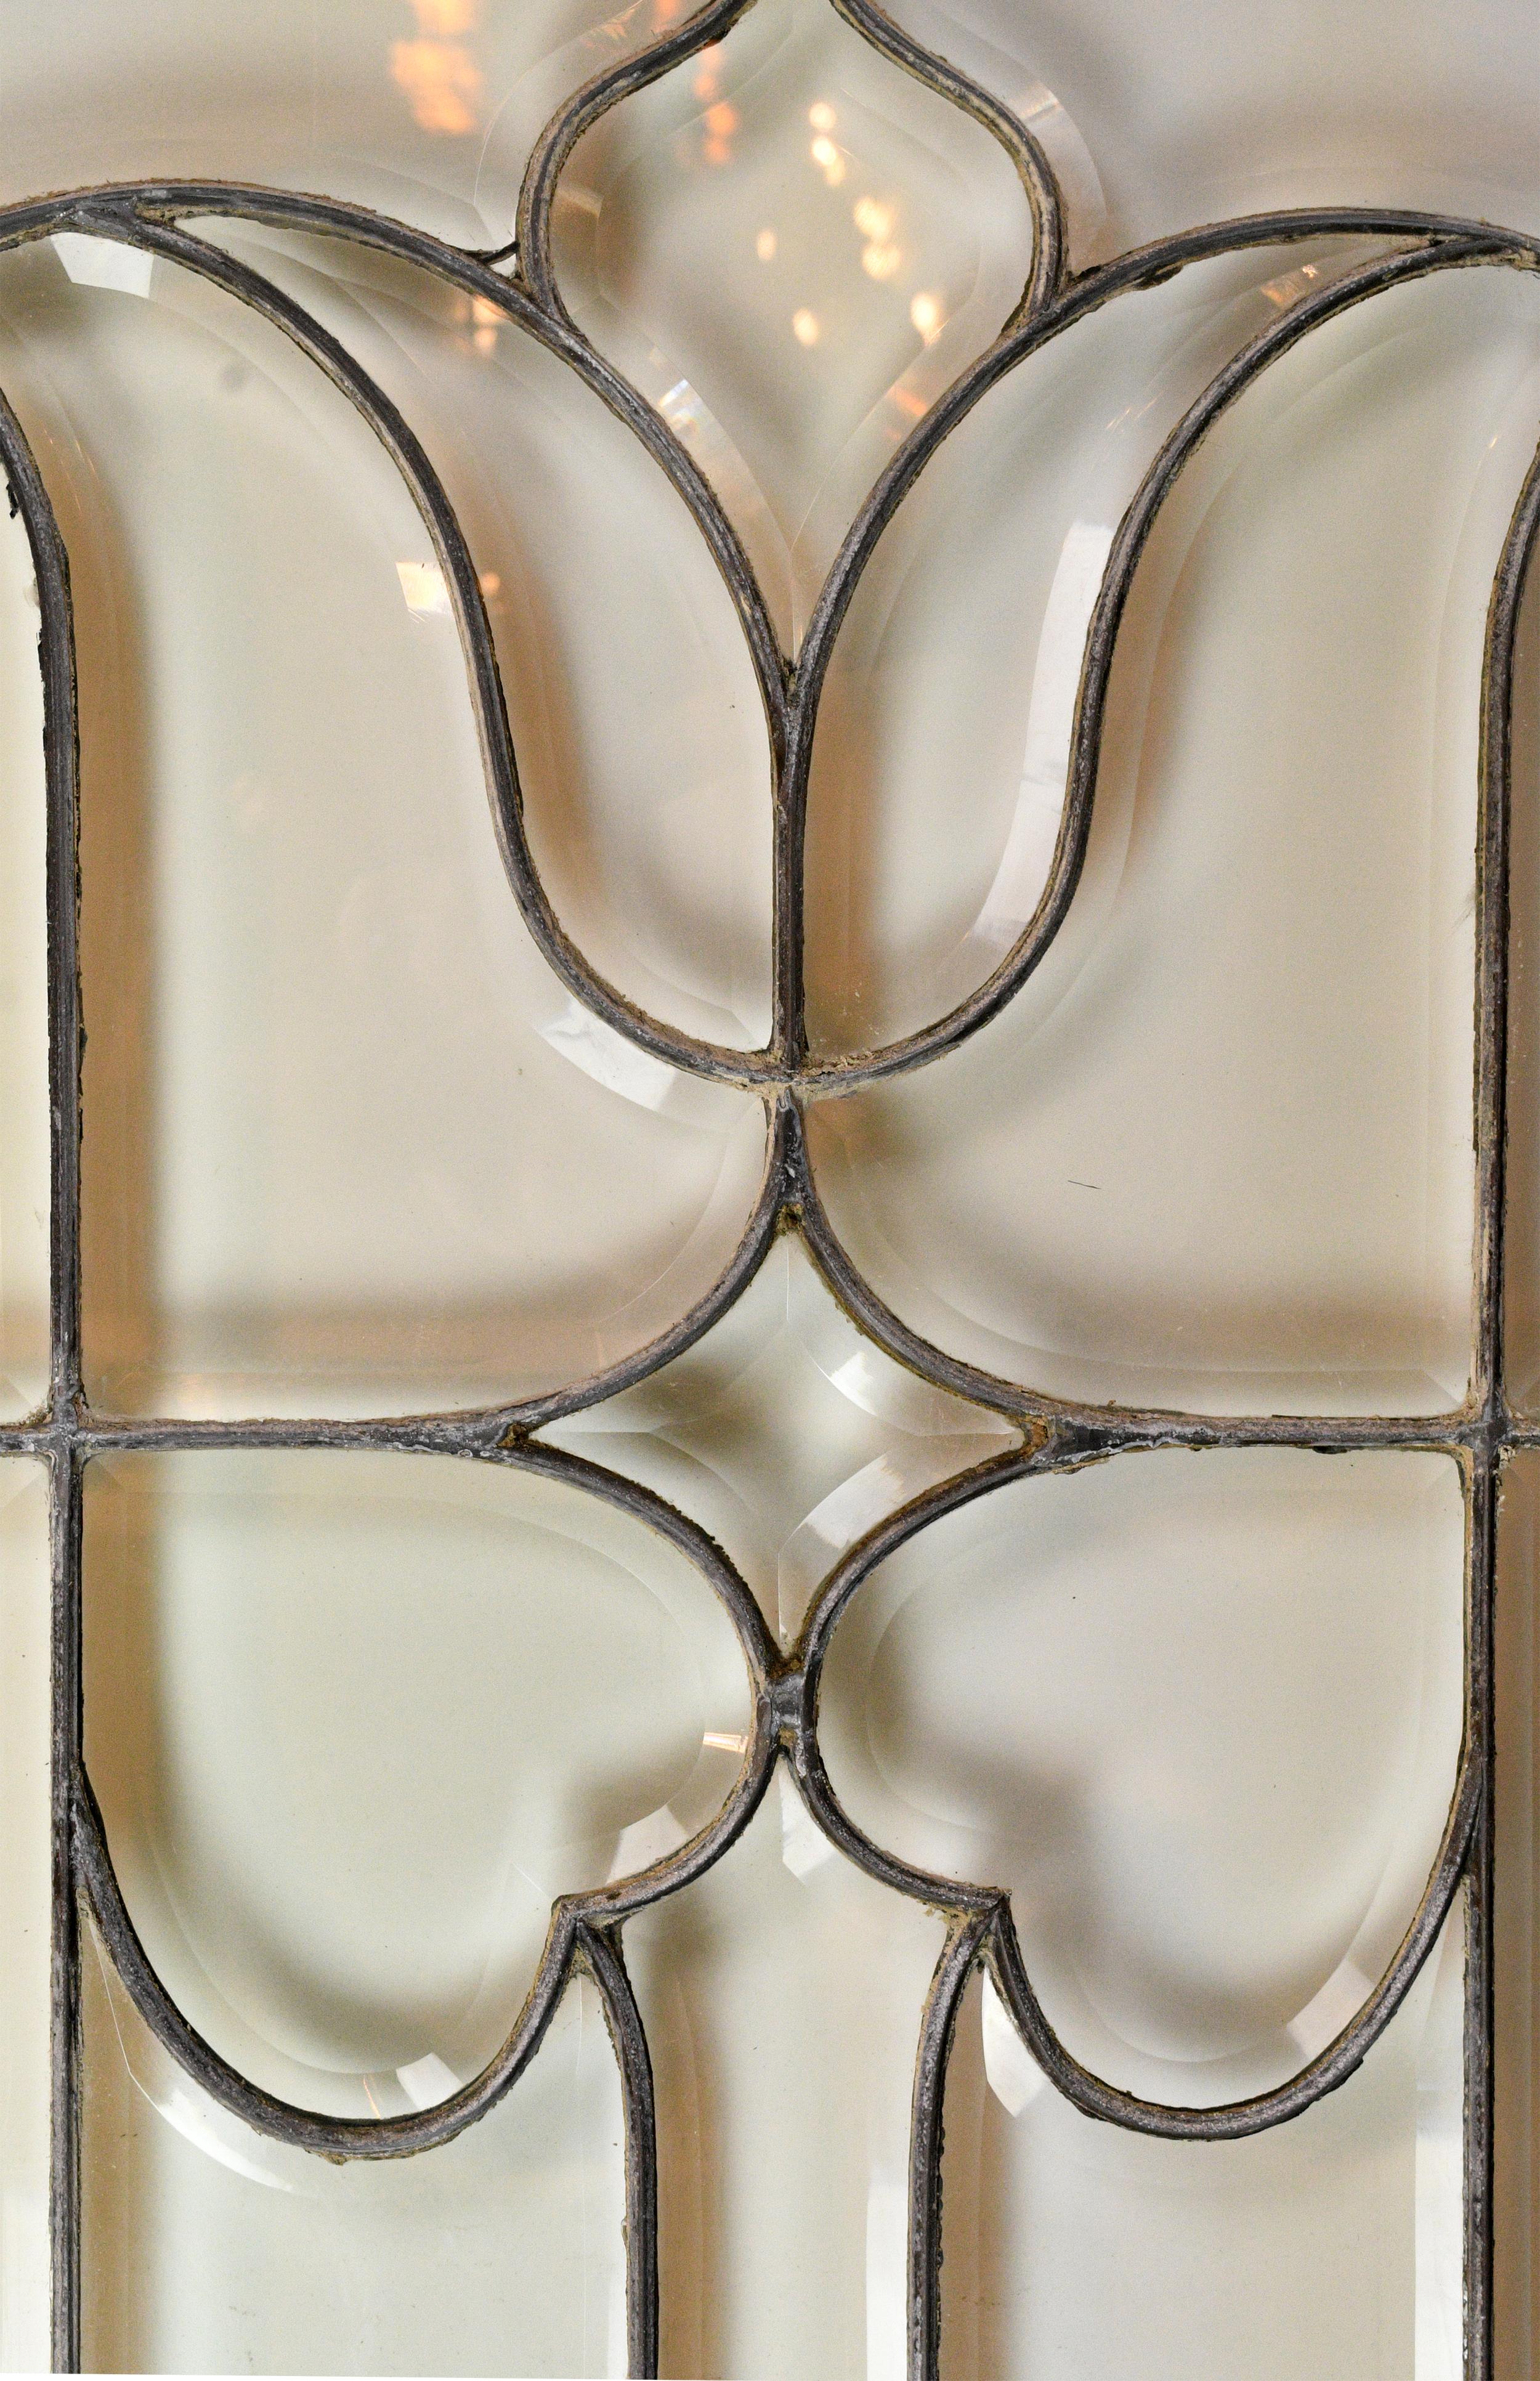 Large beveled glass window with a simple and elegant pattern throughout. Complete with wood frame,

circa 1900
Condition: Good 
Finish: Original